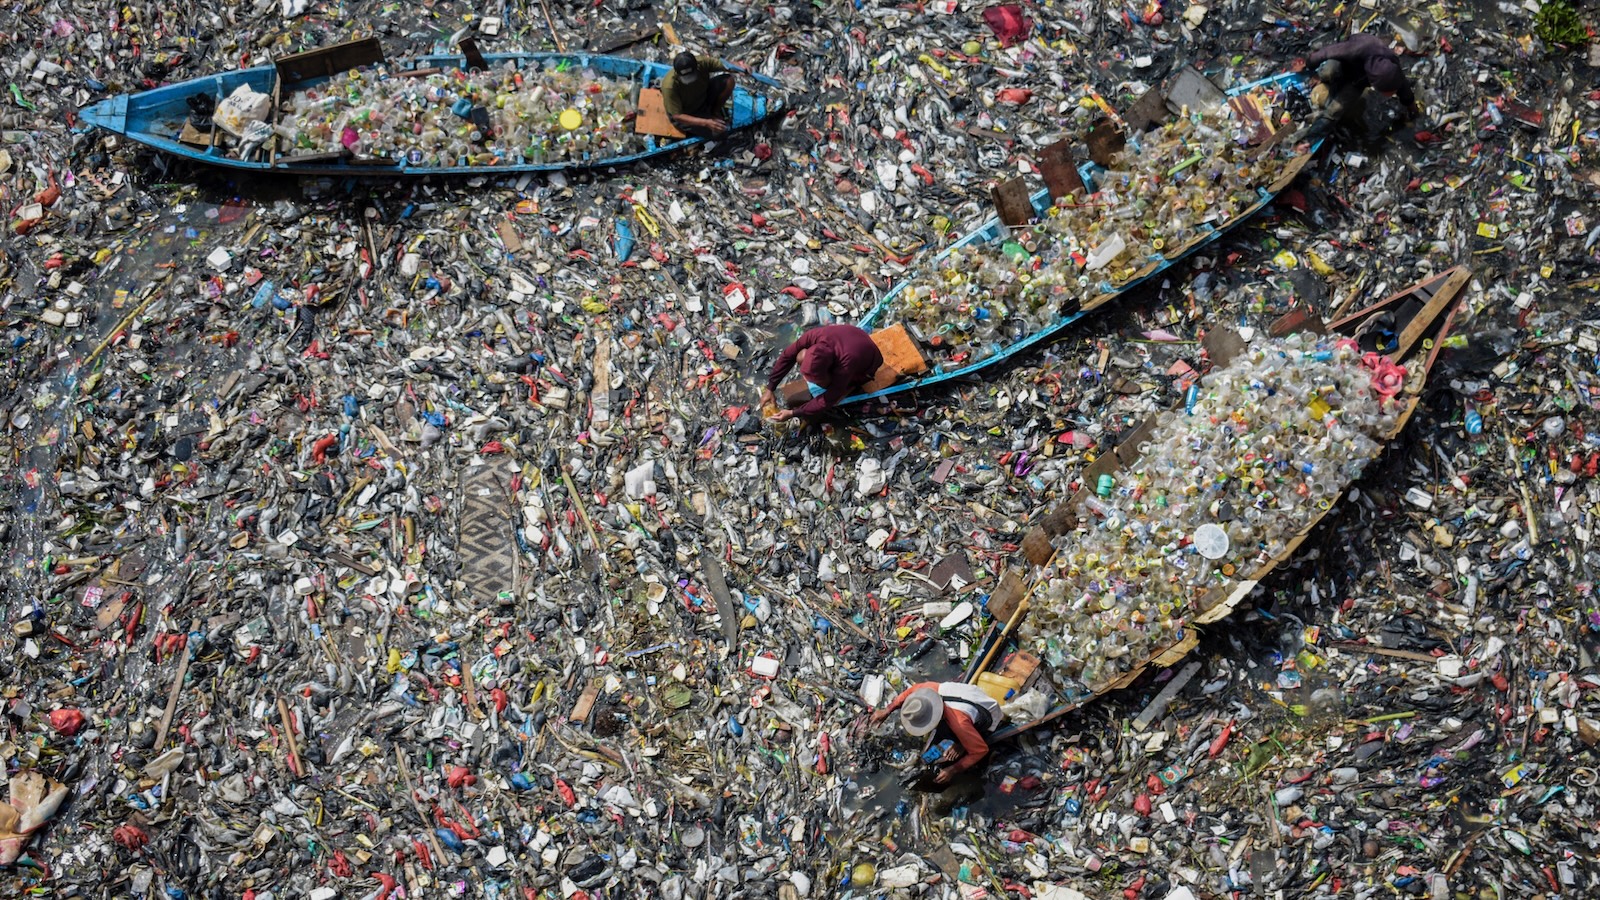 People on boats collect recyclable plastics from the heavily polluted Citarum River at Batujajar in Bandung, West Java.